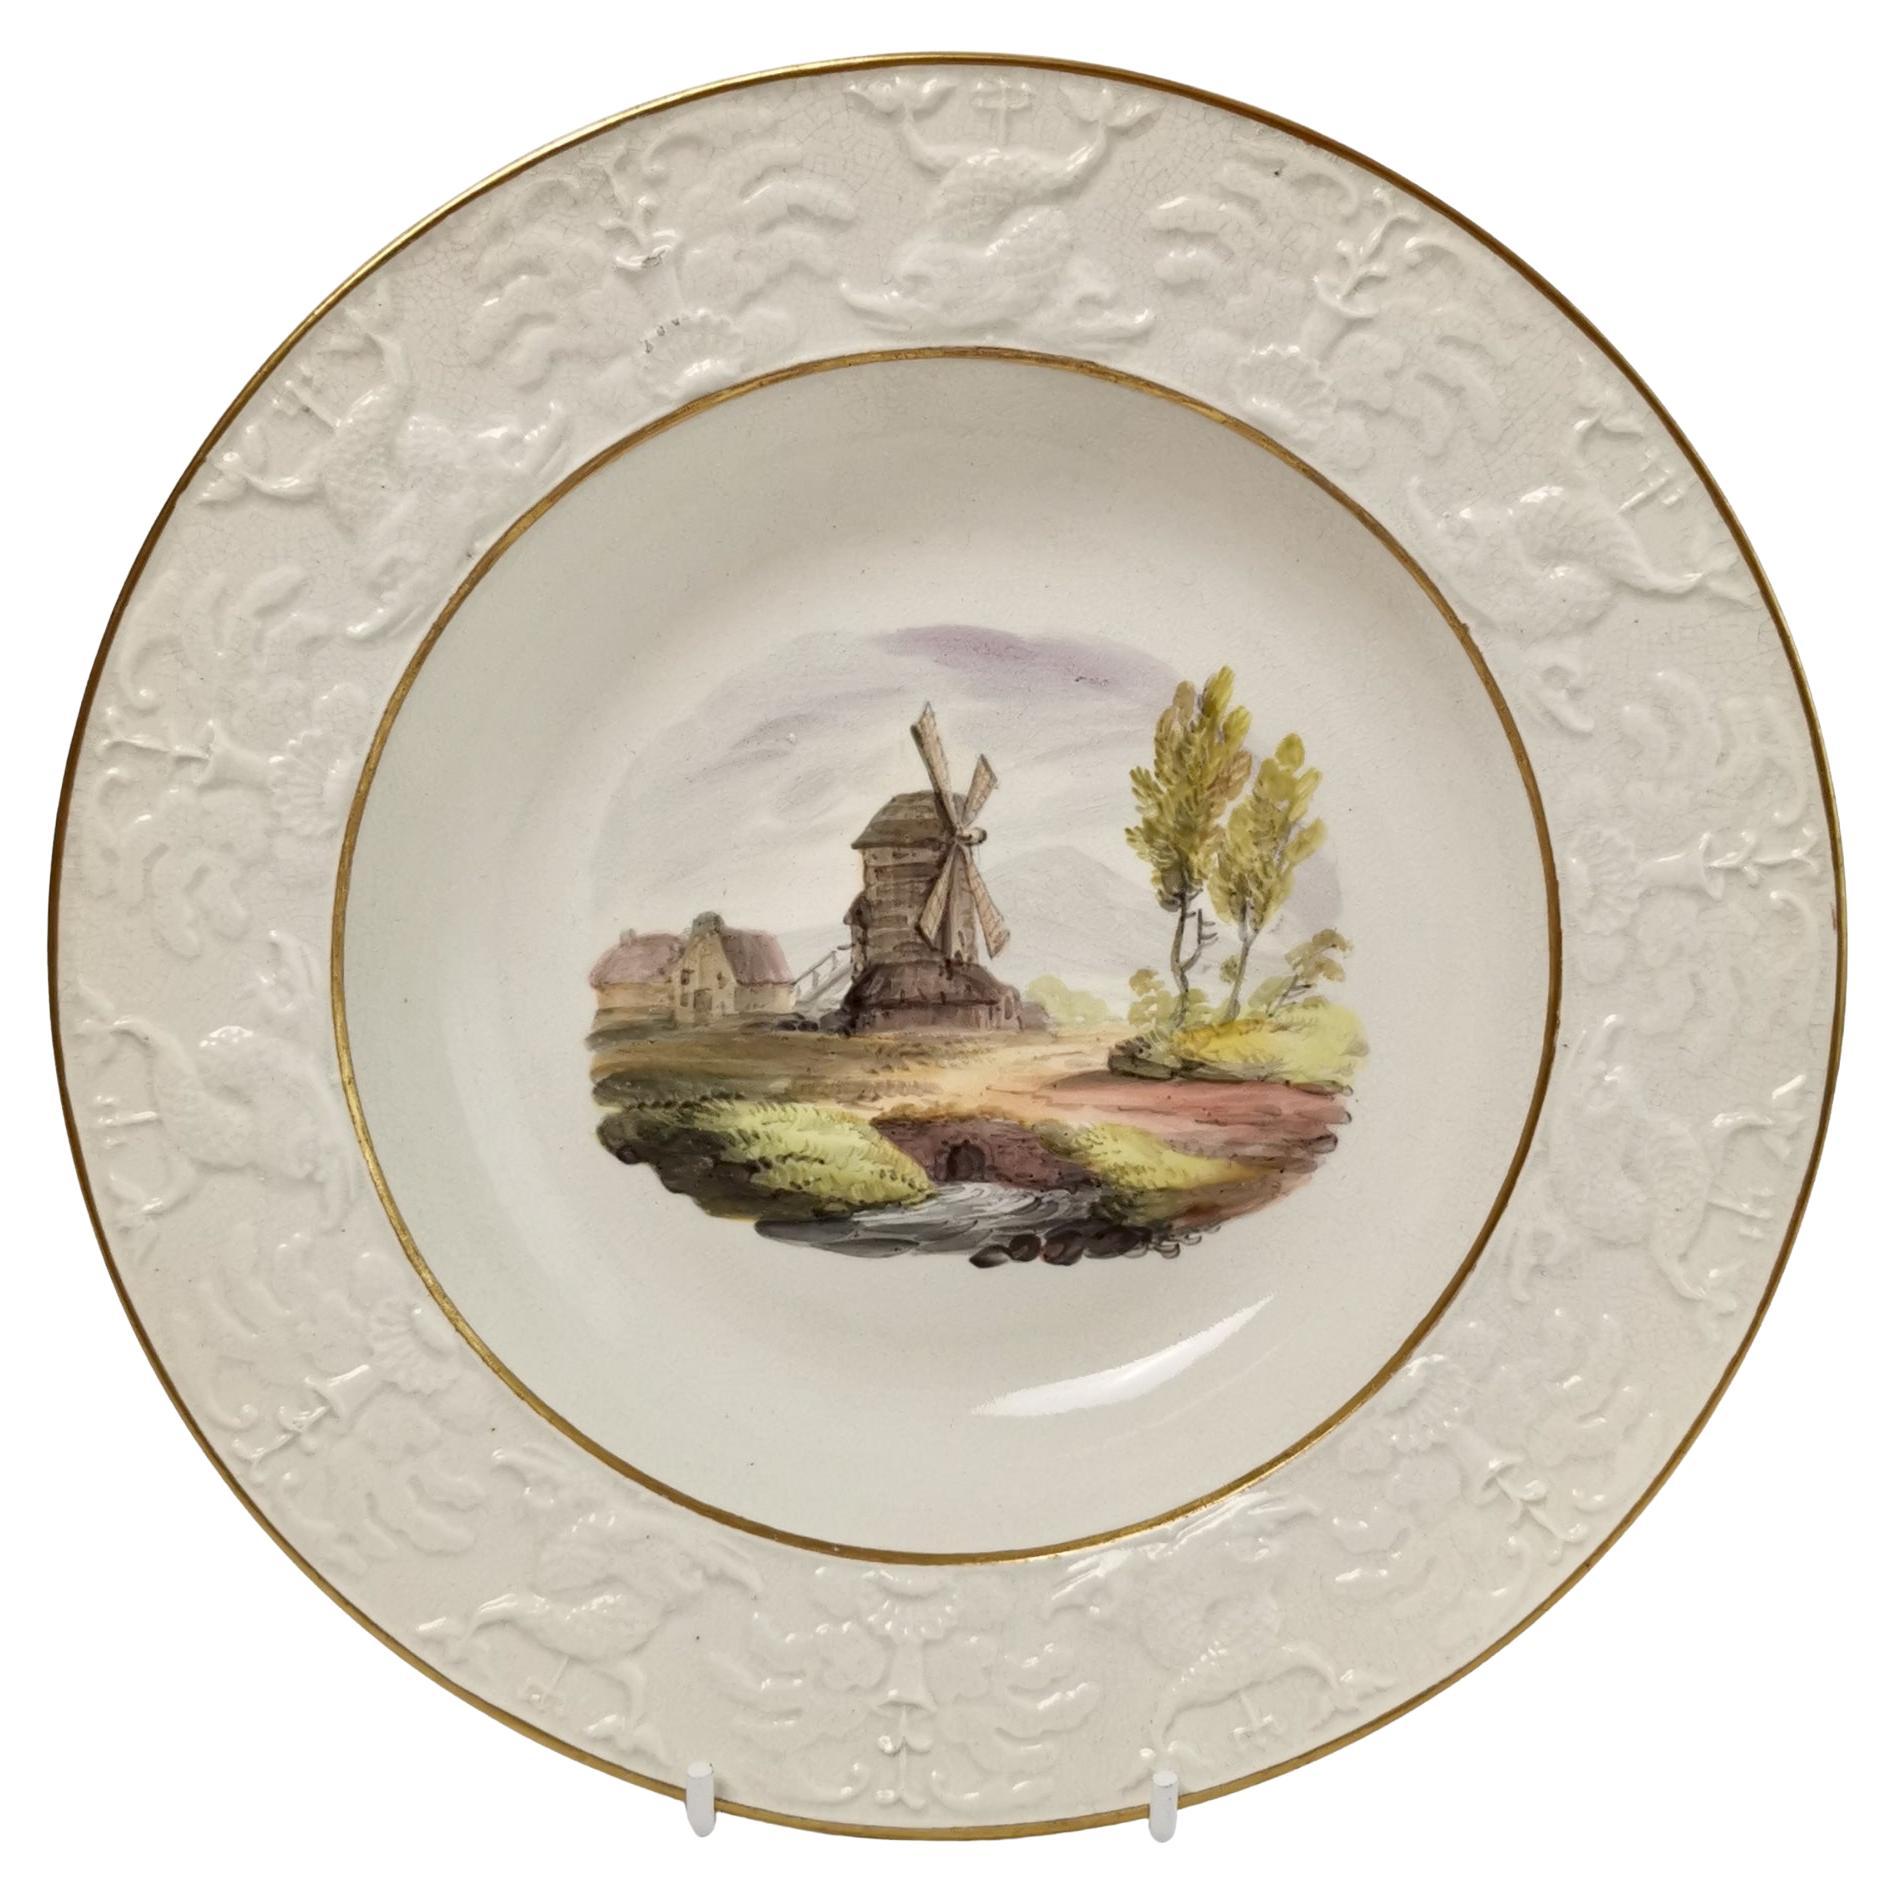 Wilson Creamware Plate, Blind Moulded with Windmill Landscape, ca 1800